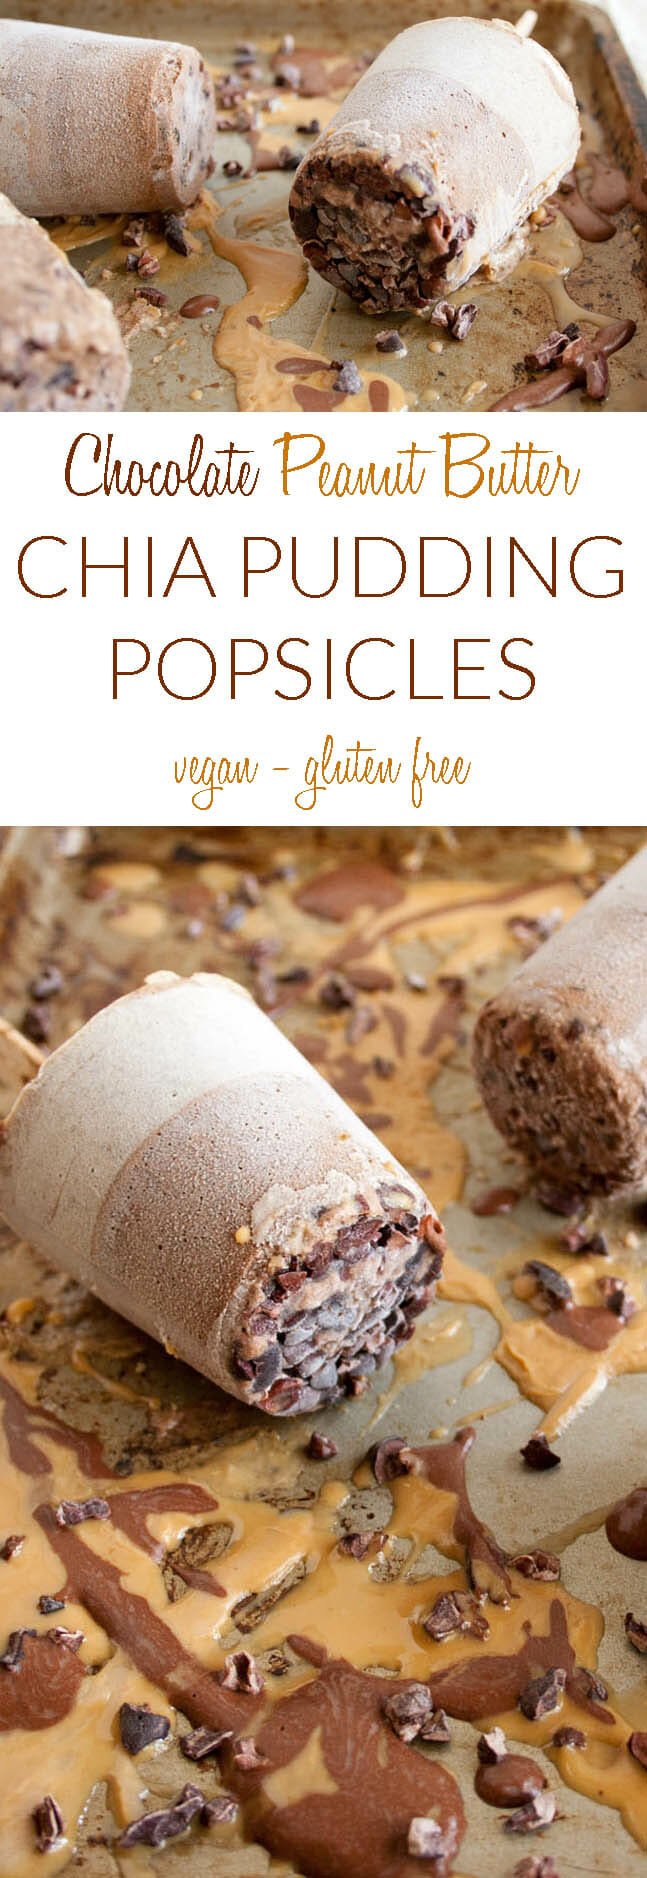 Chocolate Peanut Butter Chia Pudding Popsicles collage photo with text.